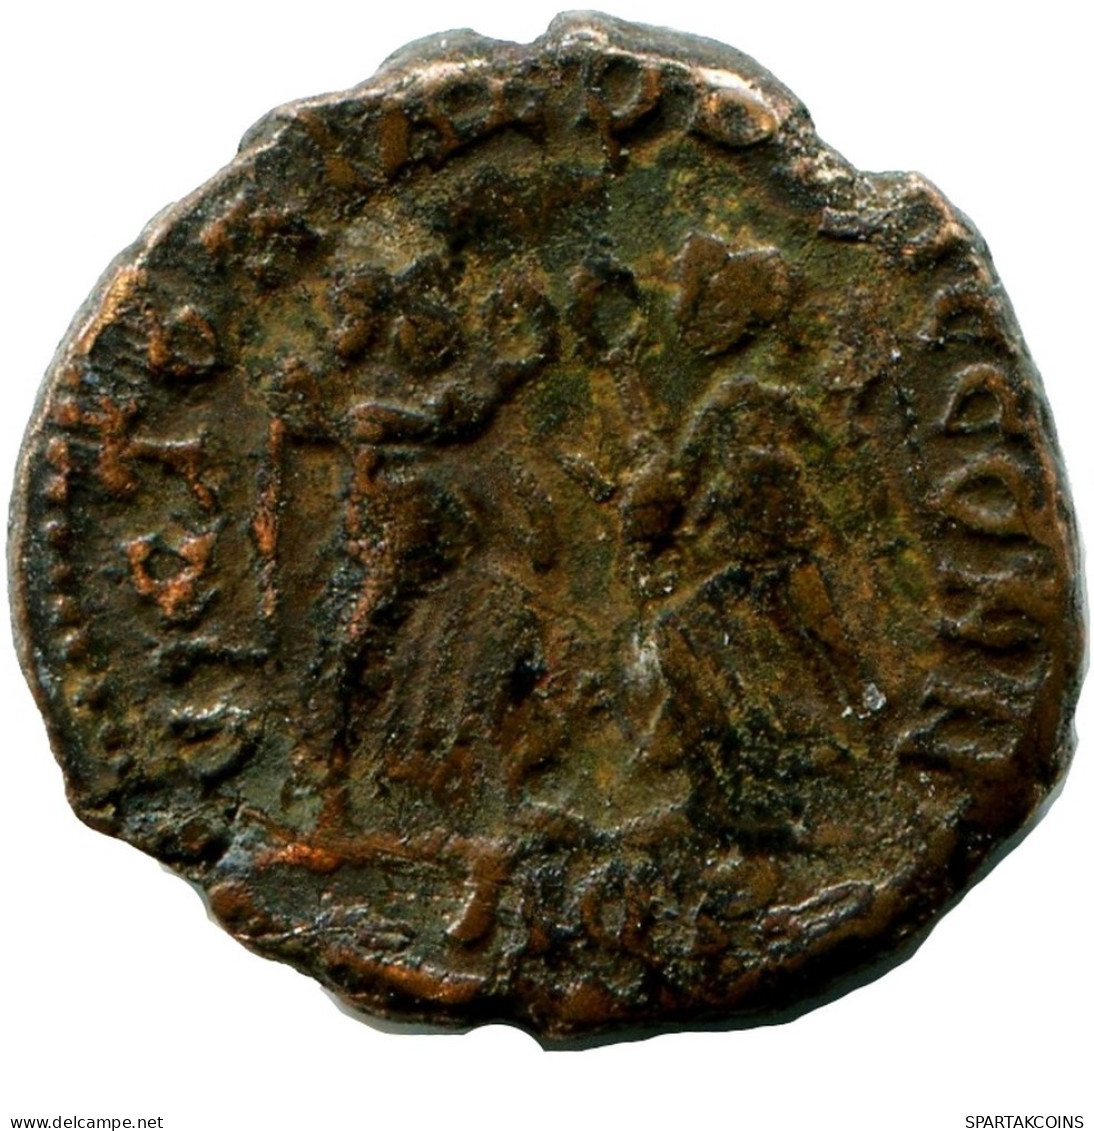 CONSTANS MINTED IN AGUILEIA ITALY FOUND IN IHNASYAH HOARD EGYPT #ANC11550.14.D.A - El Imperio Christiano (307 / 363)